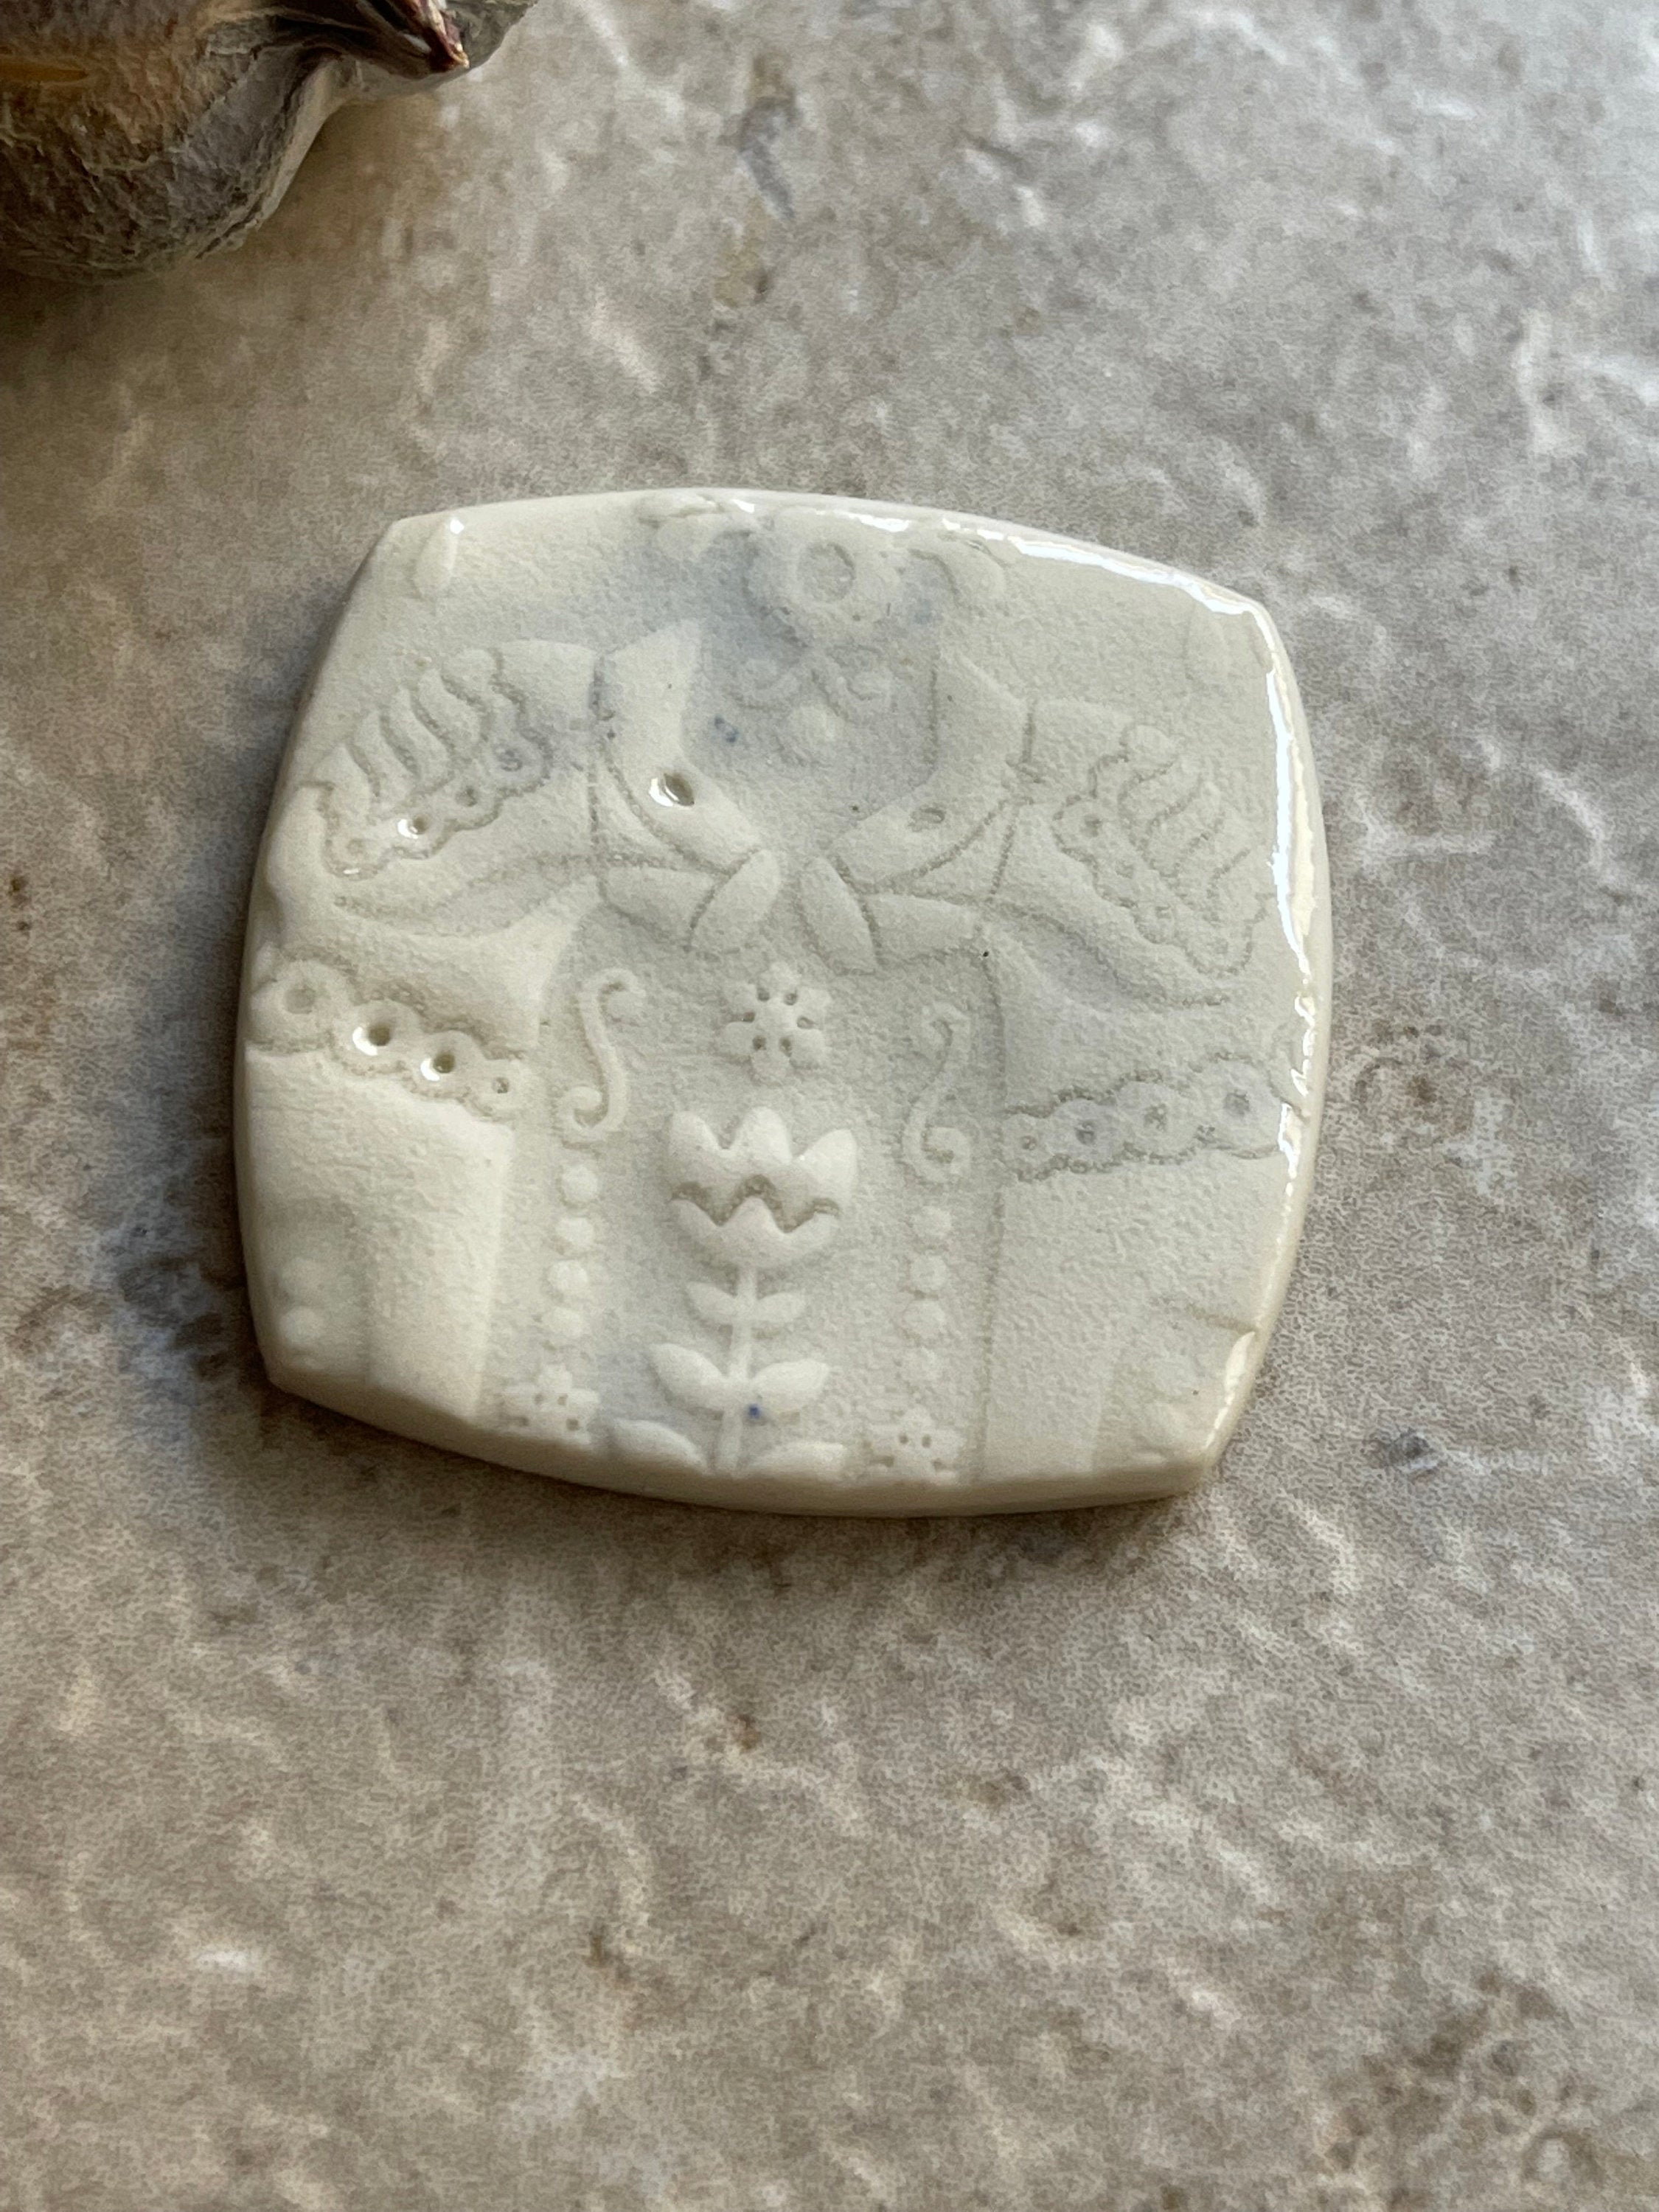 Metalsmithing Cabochon, White Dala Horse, Porcelain Pendant Cab, Ceramic Charms, Jewelry Making Components